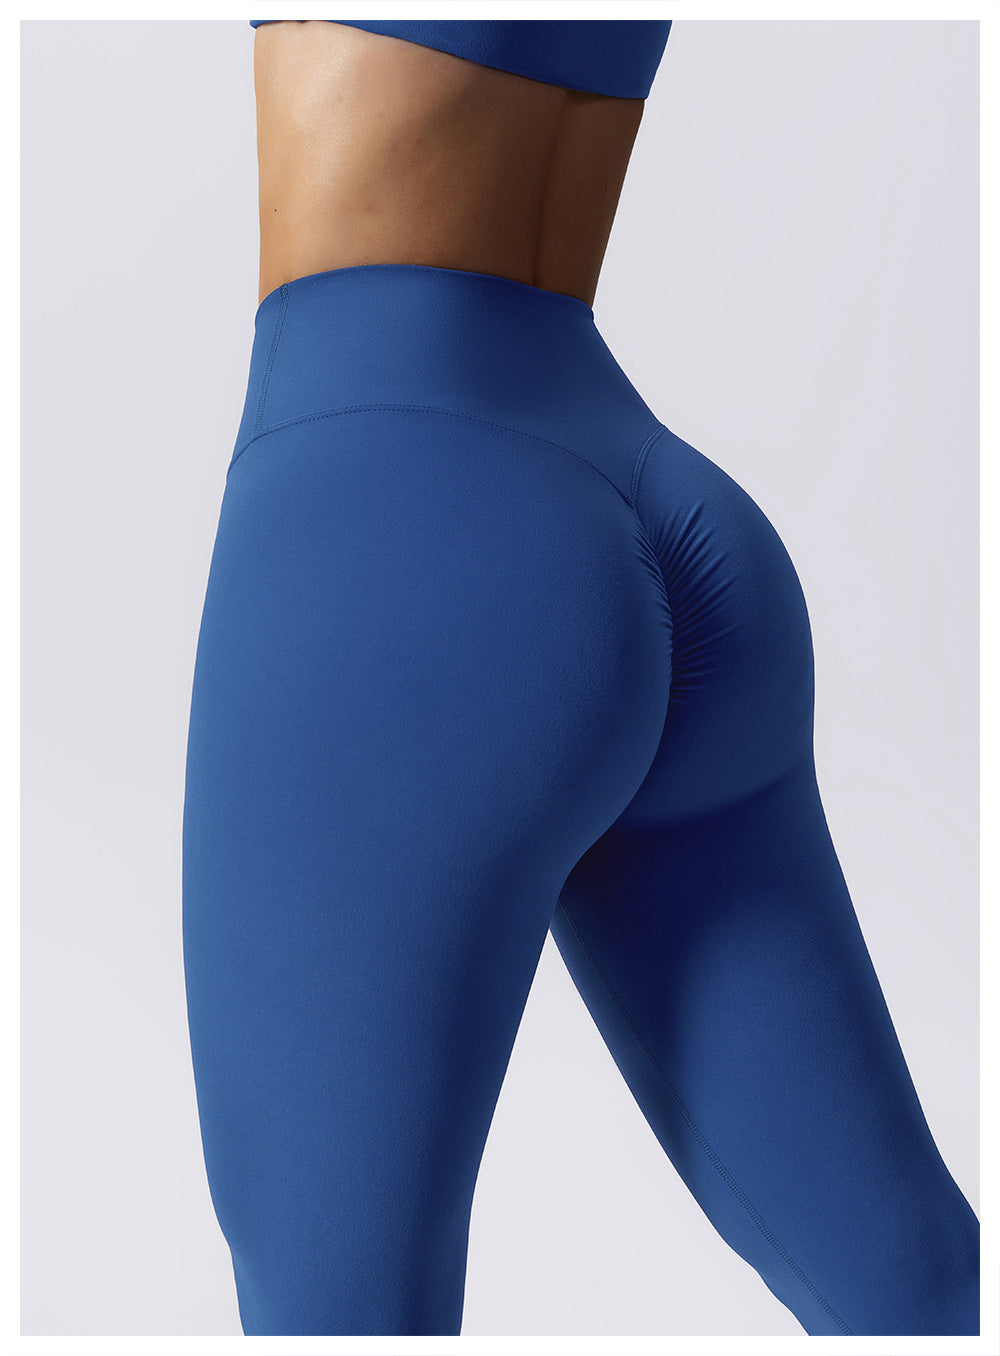 Drawstring Belly Contracting Nude High Waist Yoga Pants Quick Drying Hip Lifting Fitness Pants Tight Running Sports Pants Women